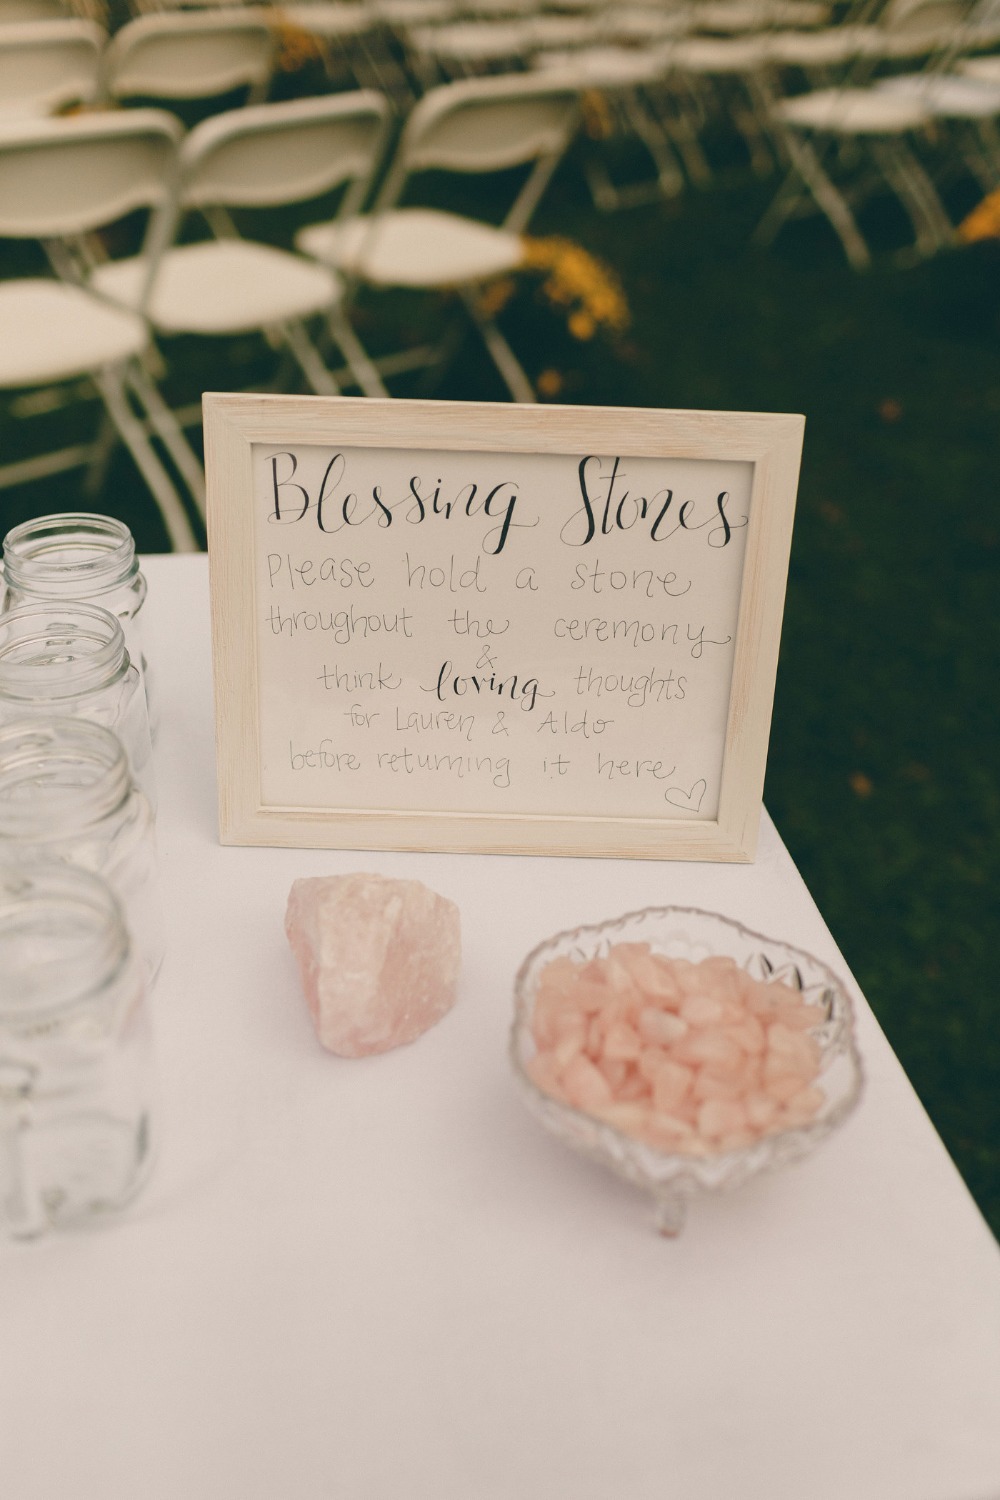 blessing stone wedding tradition